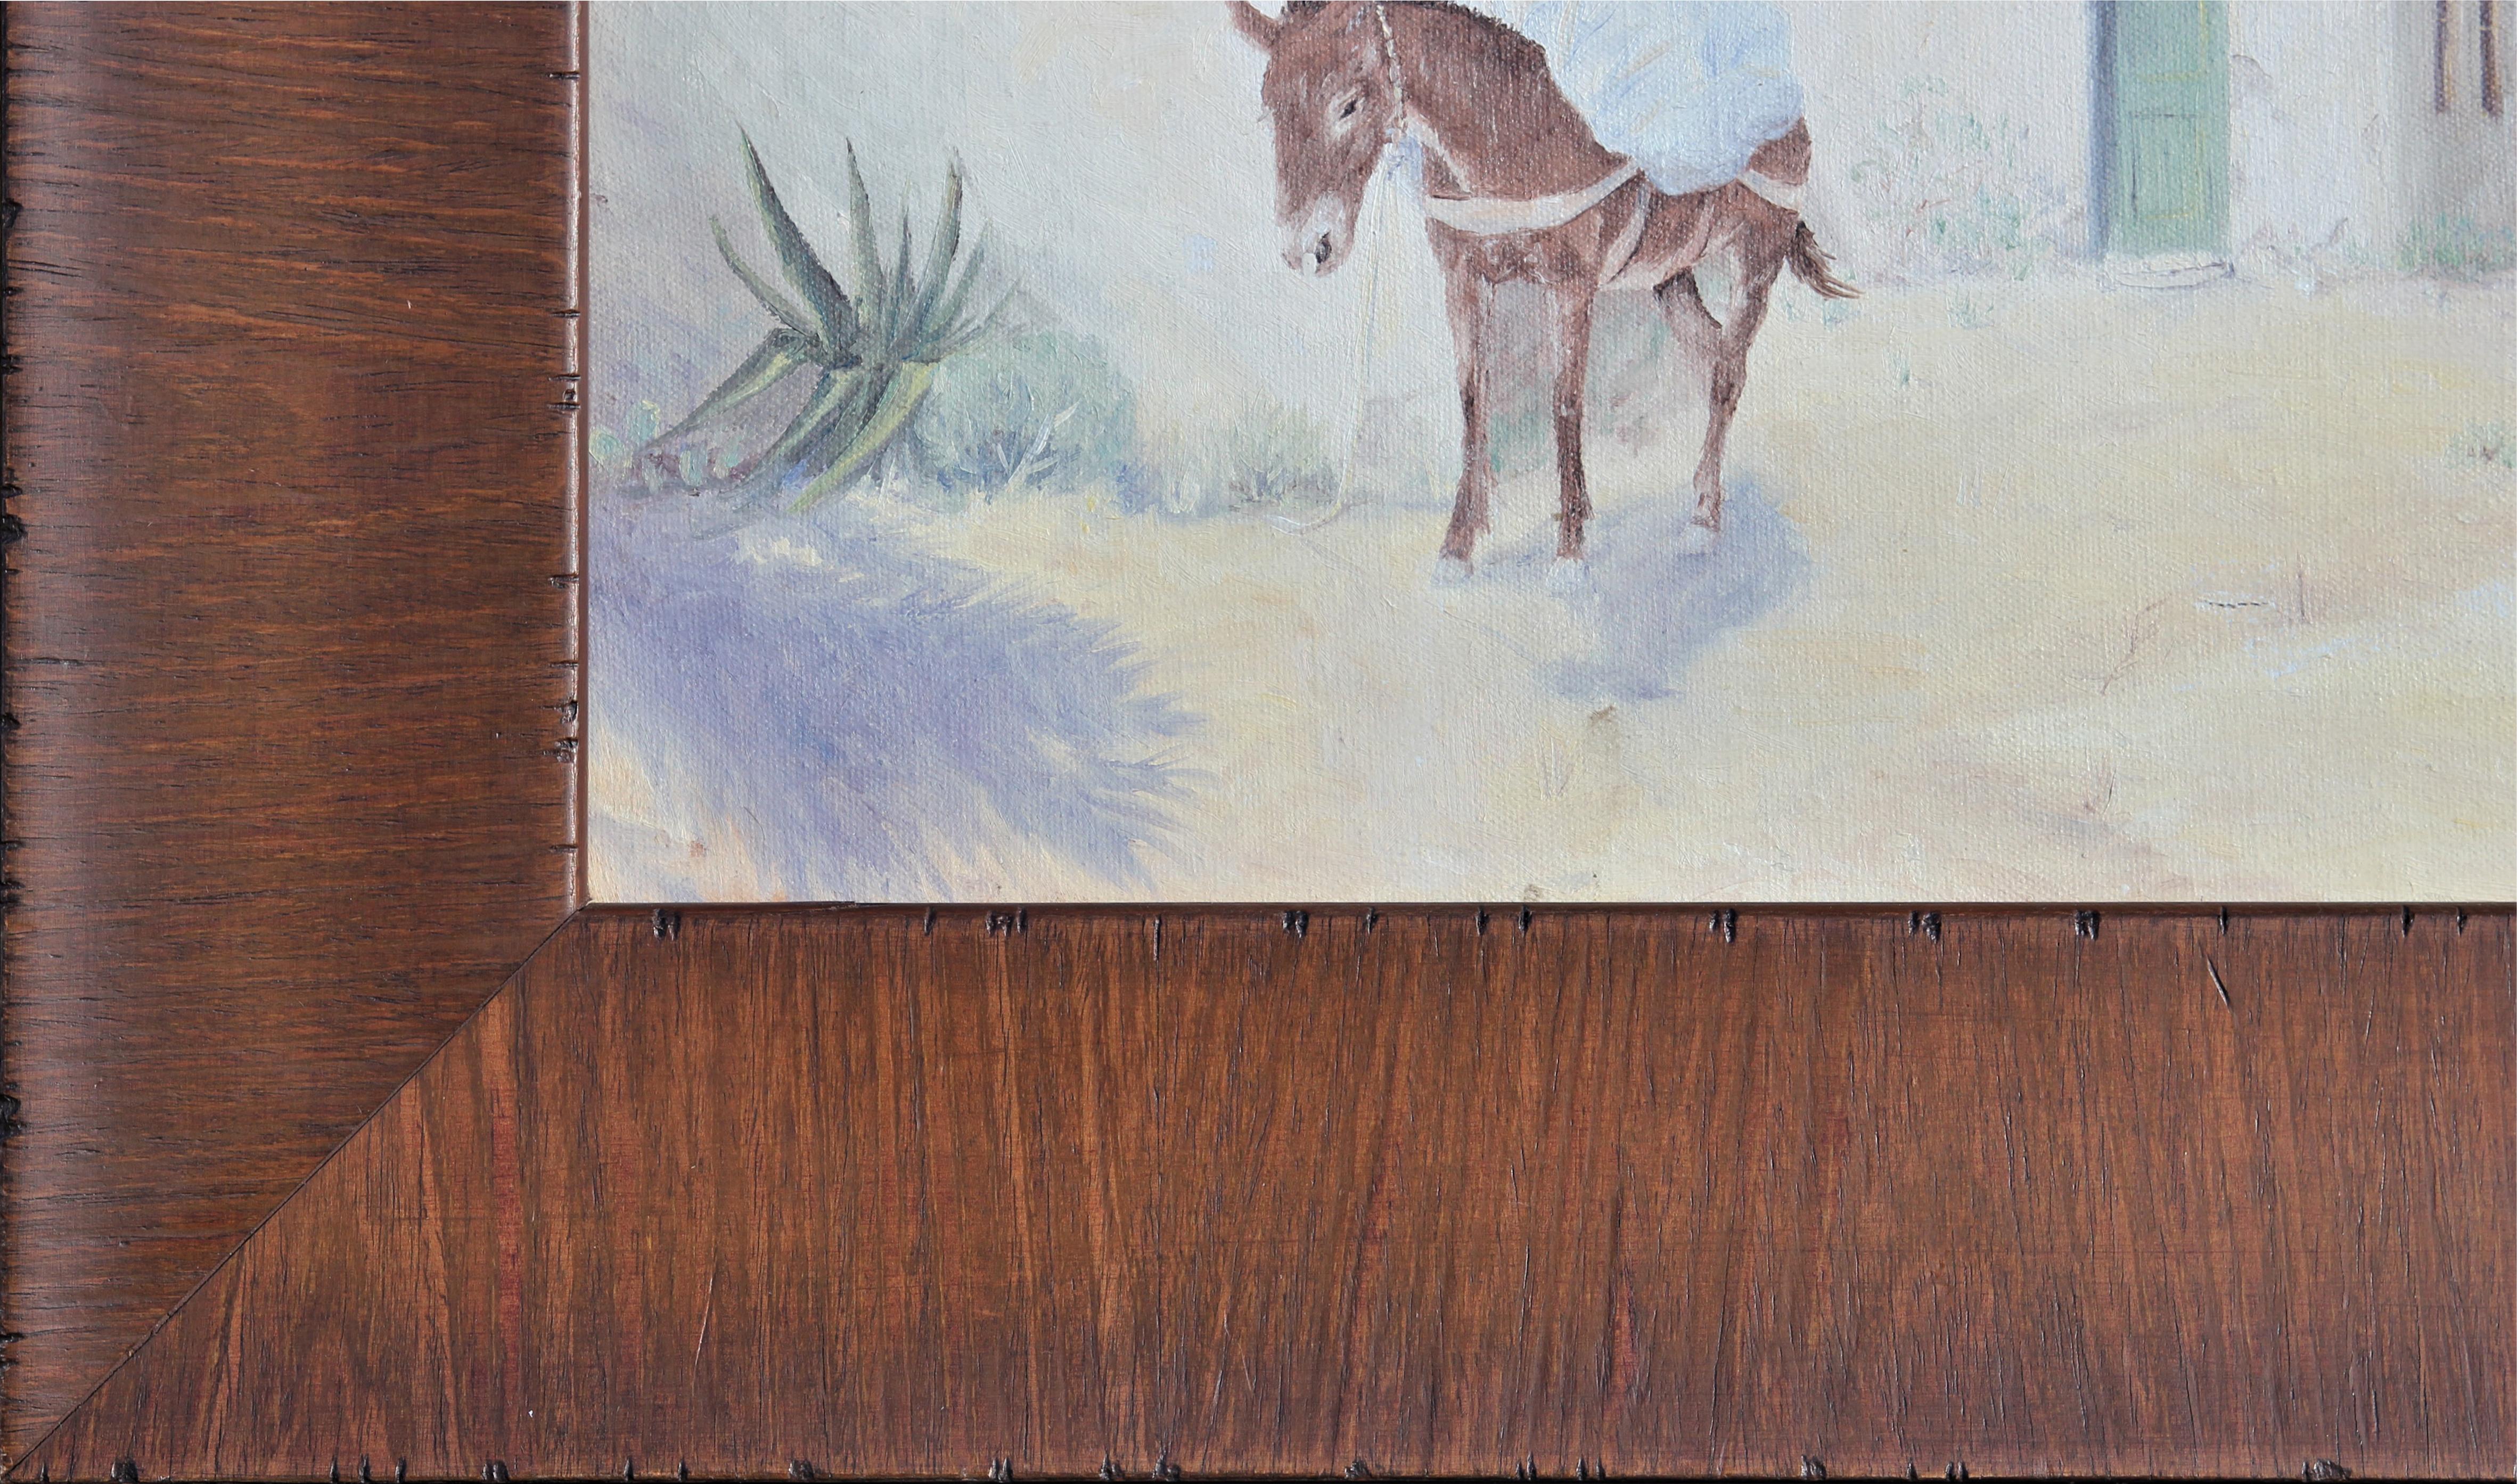 Realistic pastel toned western landscape by Texas artist, Tom Moss. Painting features a brown horse by a Southwestern-style house. Signed by the artist in the bottom right. Framed in a beautiful natural wooden frame. 

Dimensions Without Frame: H